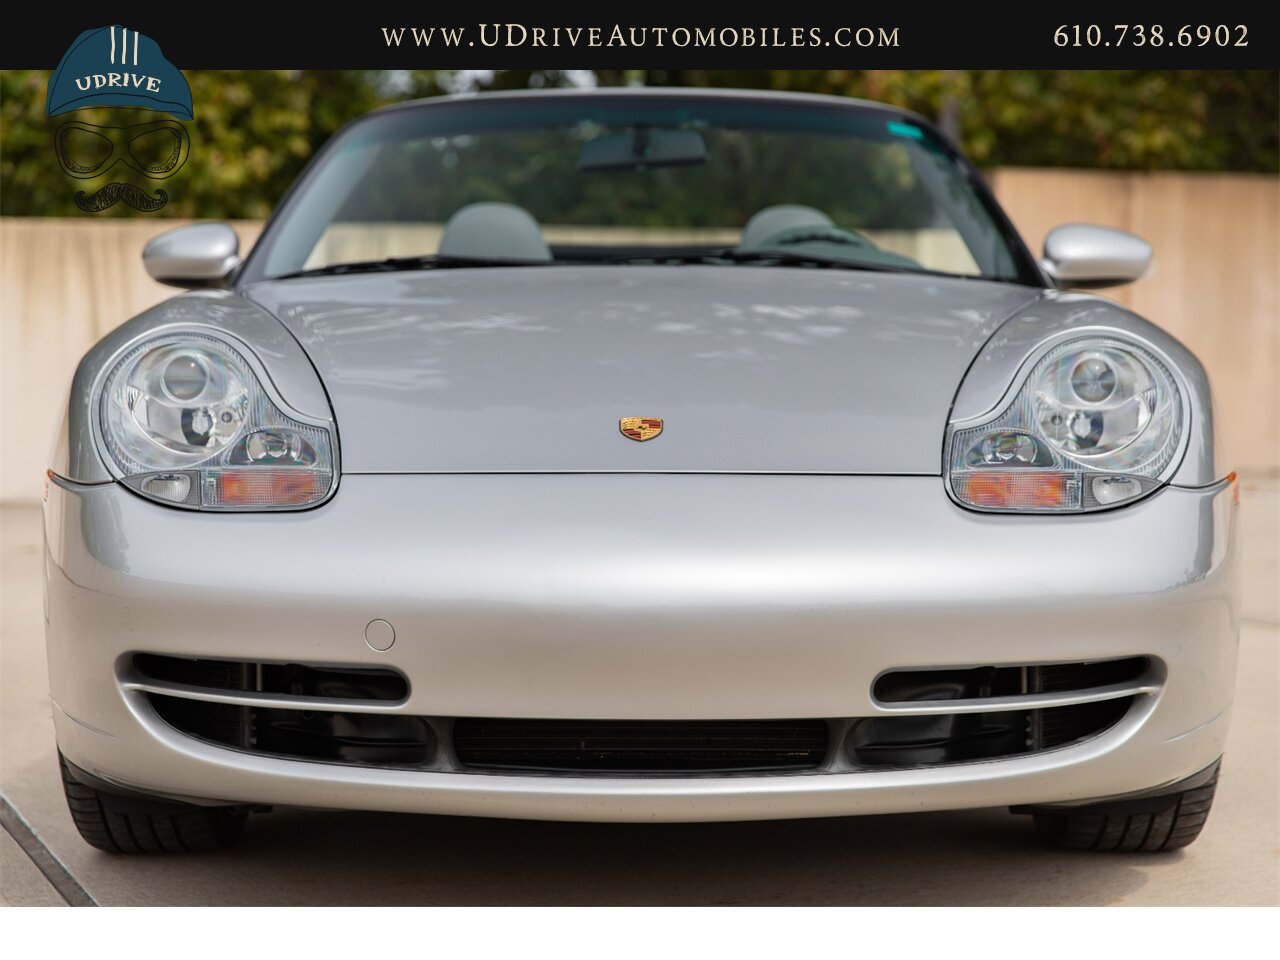 2001 Porsche 911 Carrera 4 Cabriolet Tiptronic IMS Upgrade  Power Seats 18in Turbo Look Wheels 2 Owners $5k Recent Service - Photo 15 - West Chester, PA 19382